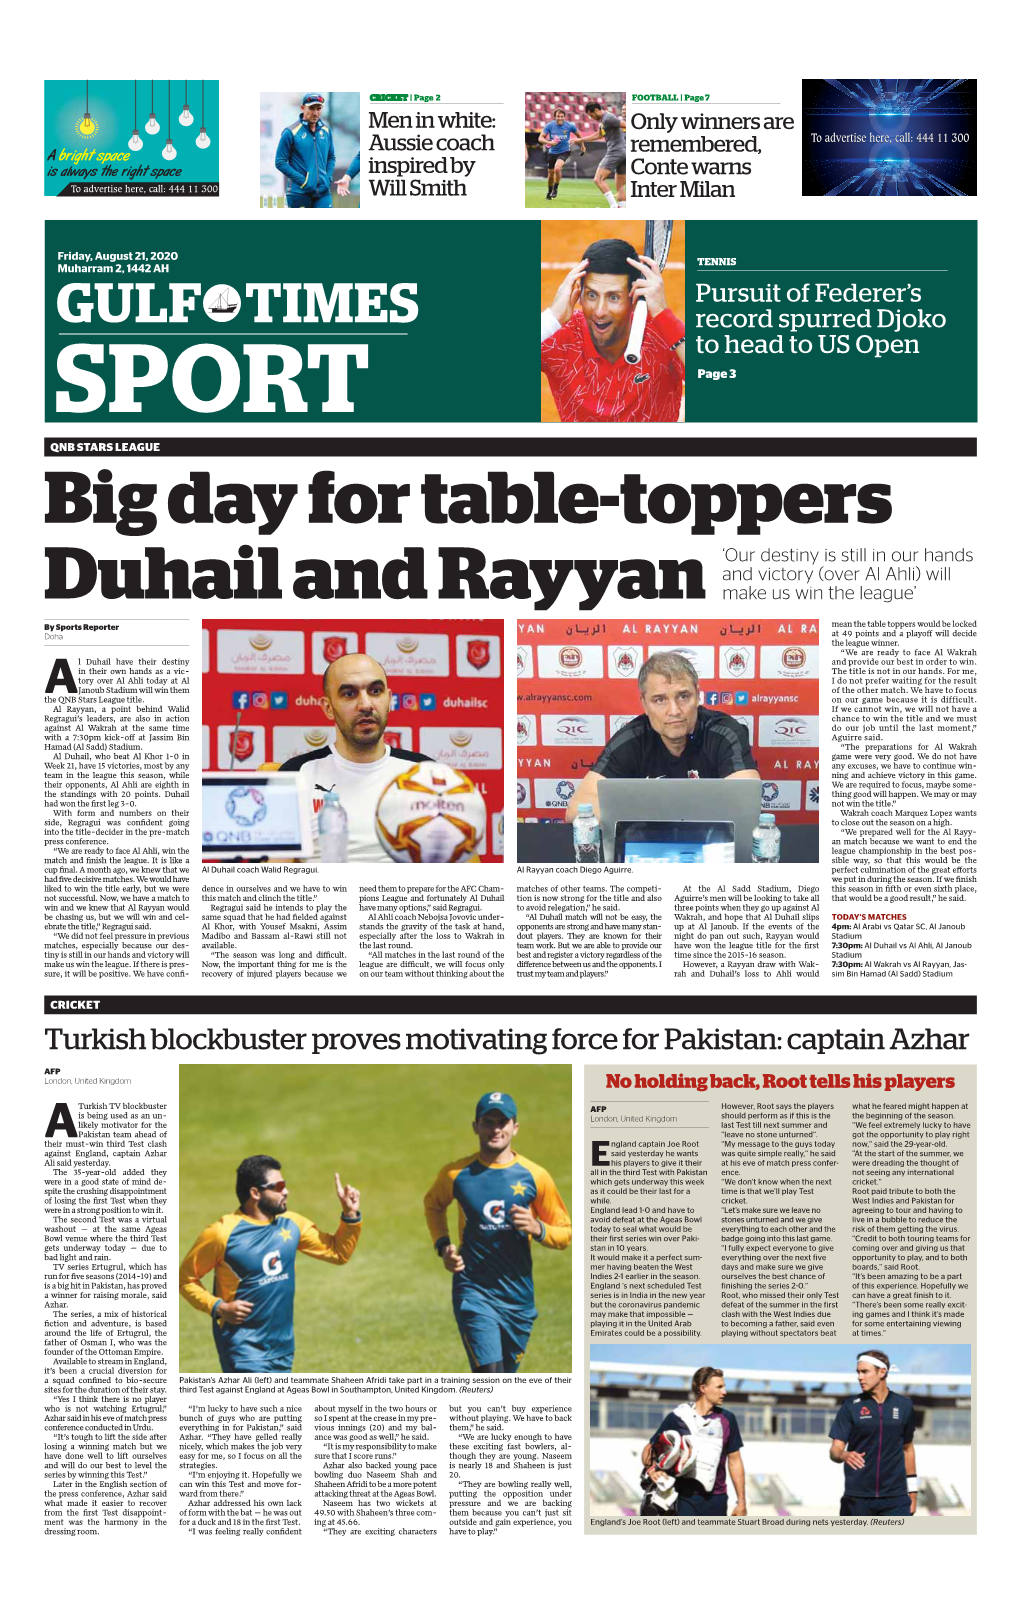 SPORT Page 3 QNB STARS LEAGUE Big Day for Table-Toppers ‘Our Destiny Is Still in Our Hands and Victory (Over Al Ahli) Will Duhail and Rayyan Make Us Win the League’